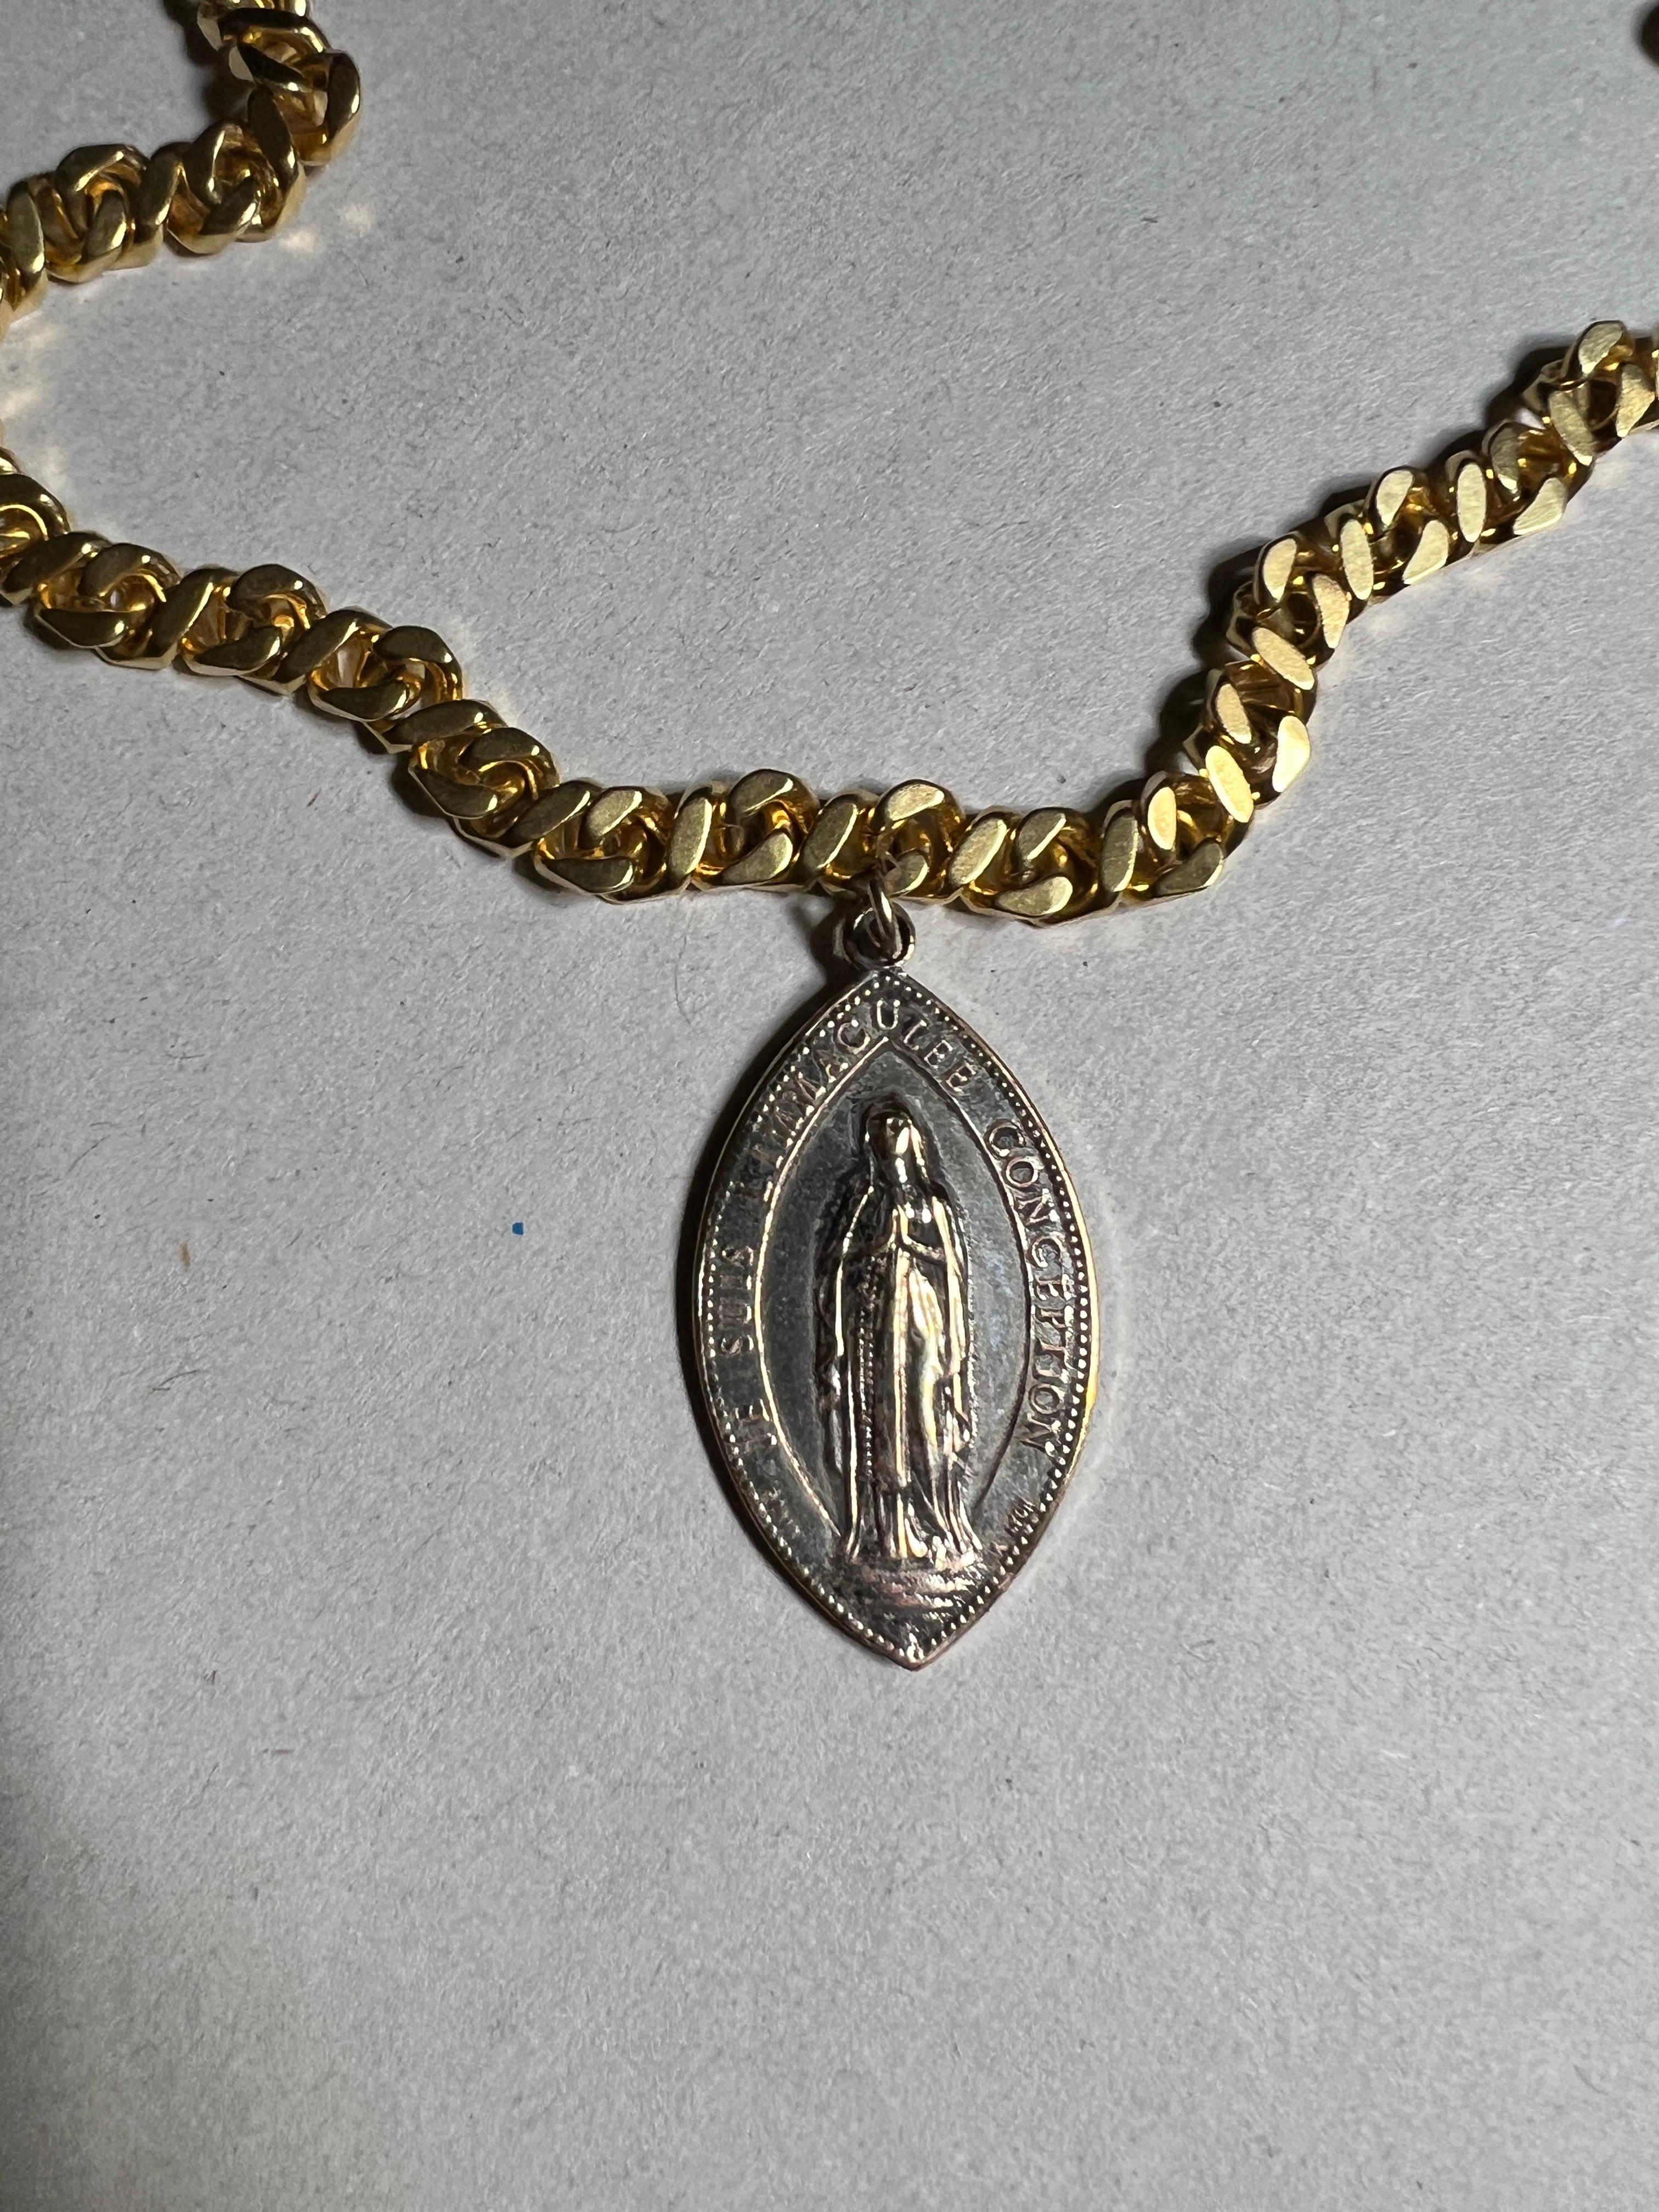 Vintage Original French Medal Pendant Gold Plated Chain Necklace For Sale 1